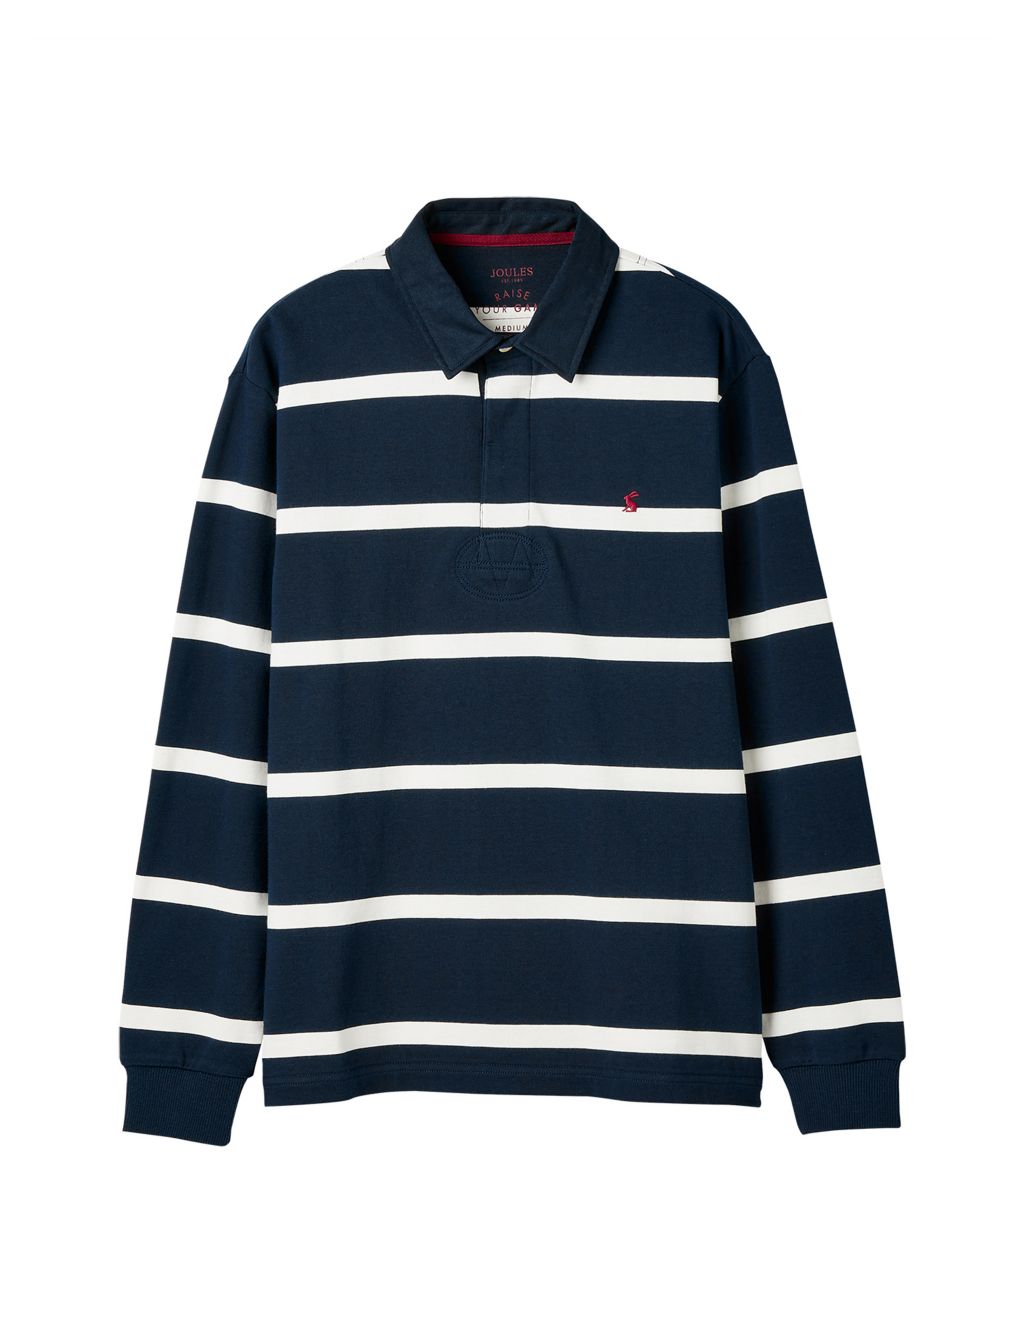 Pure Cotton Striped Long Sleeve Rugby Shirt image 2